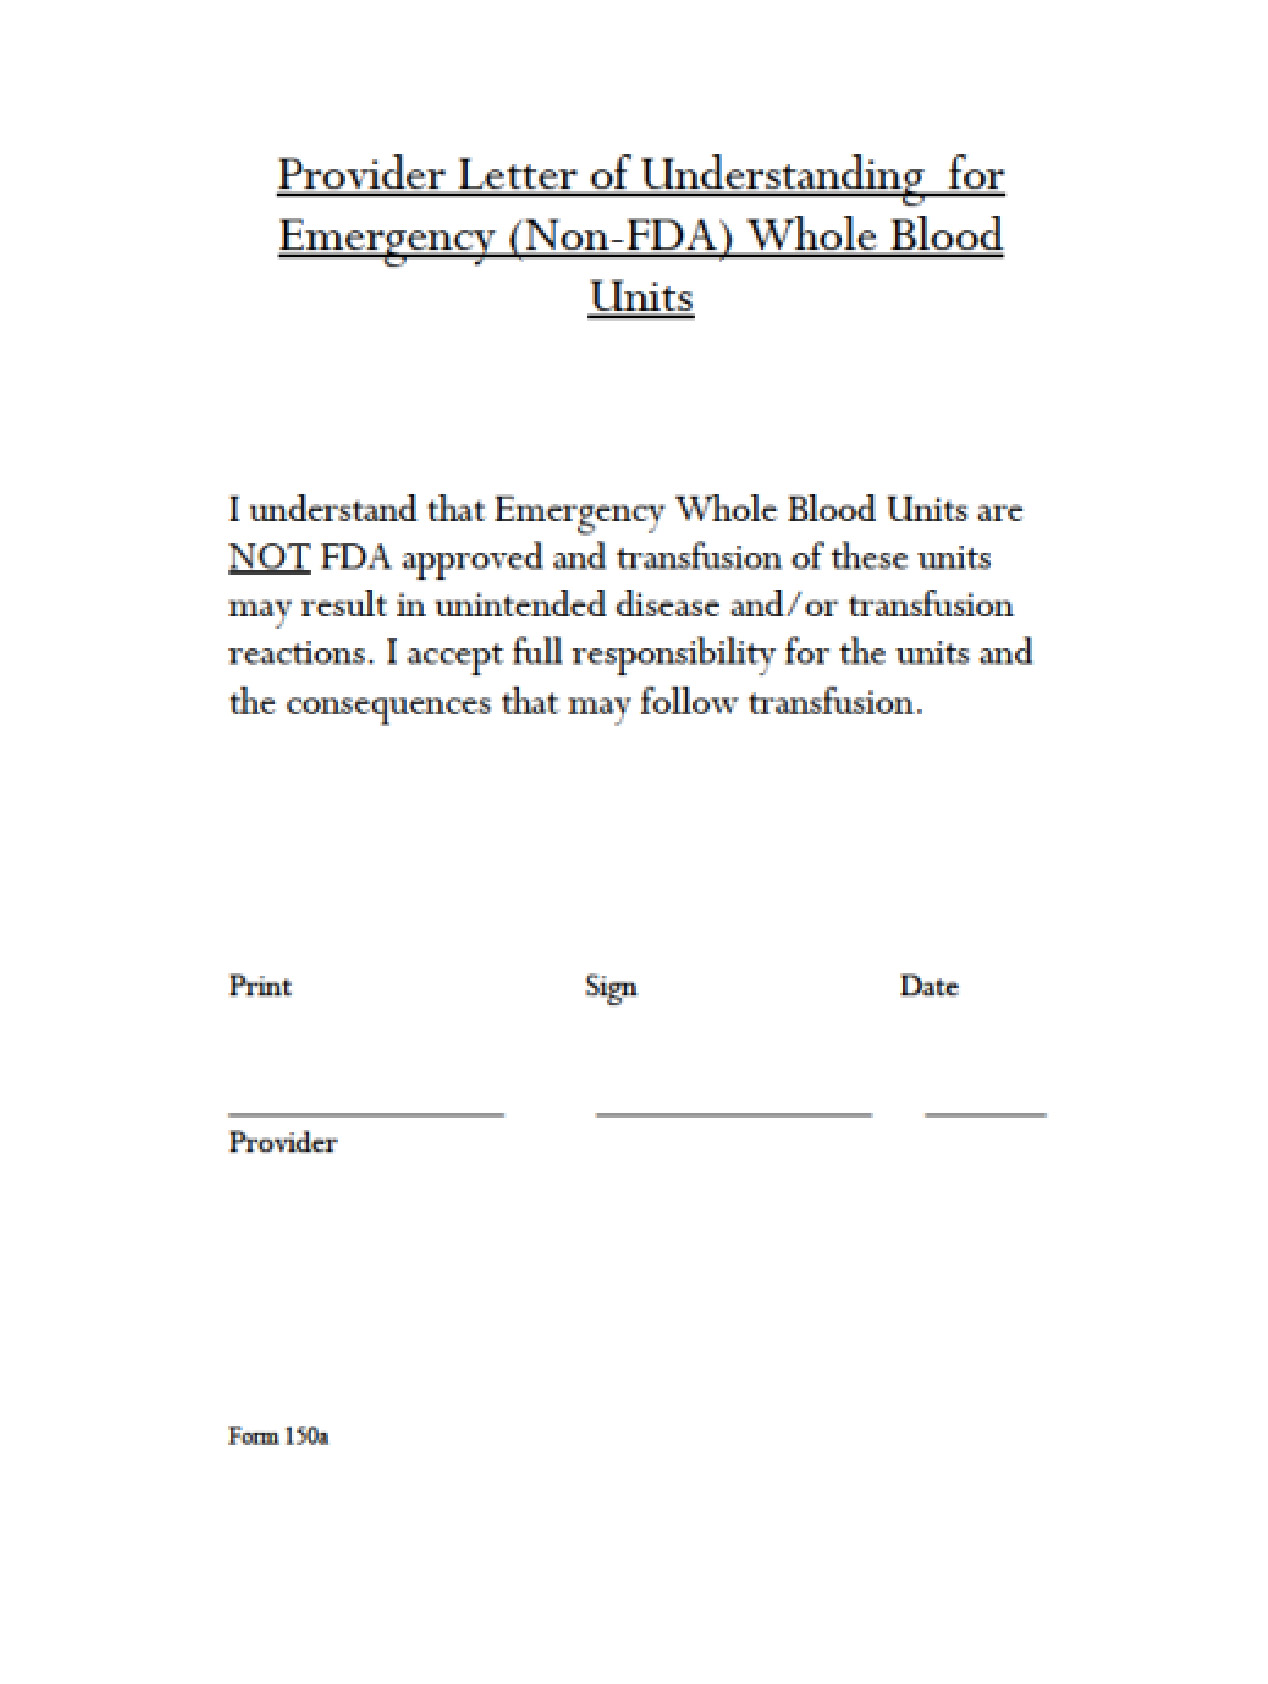 Form 150B: Emergency Release Letter of Understanding (Untested)